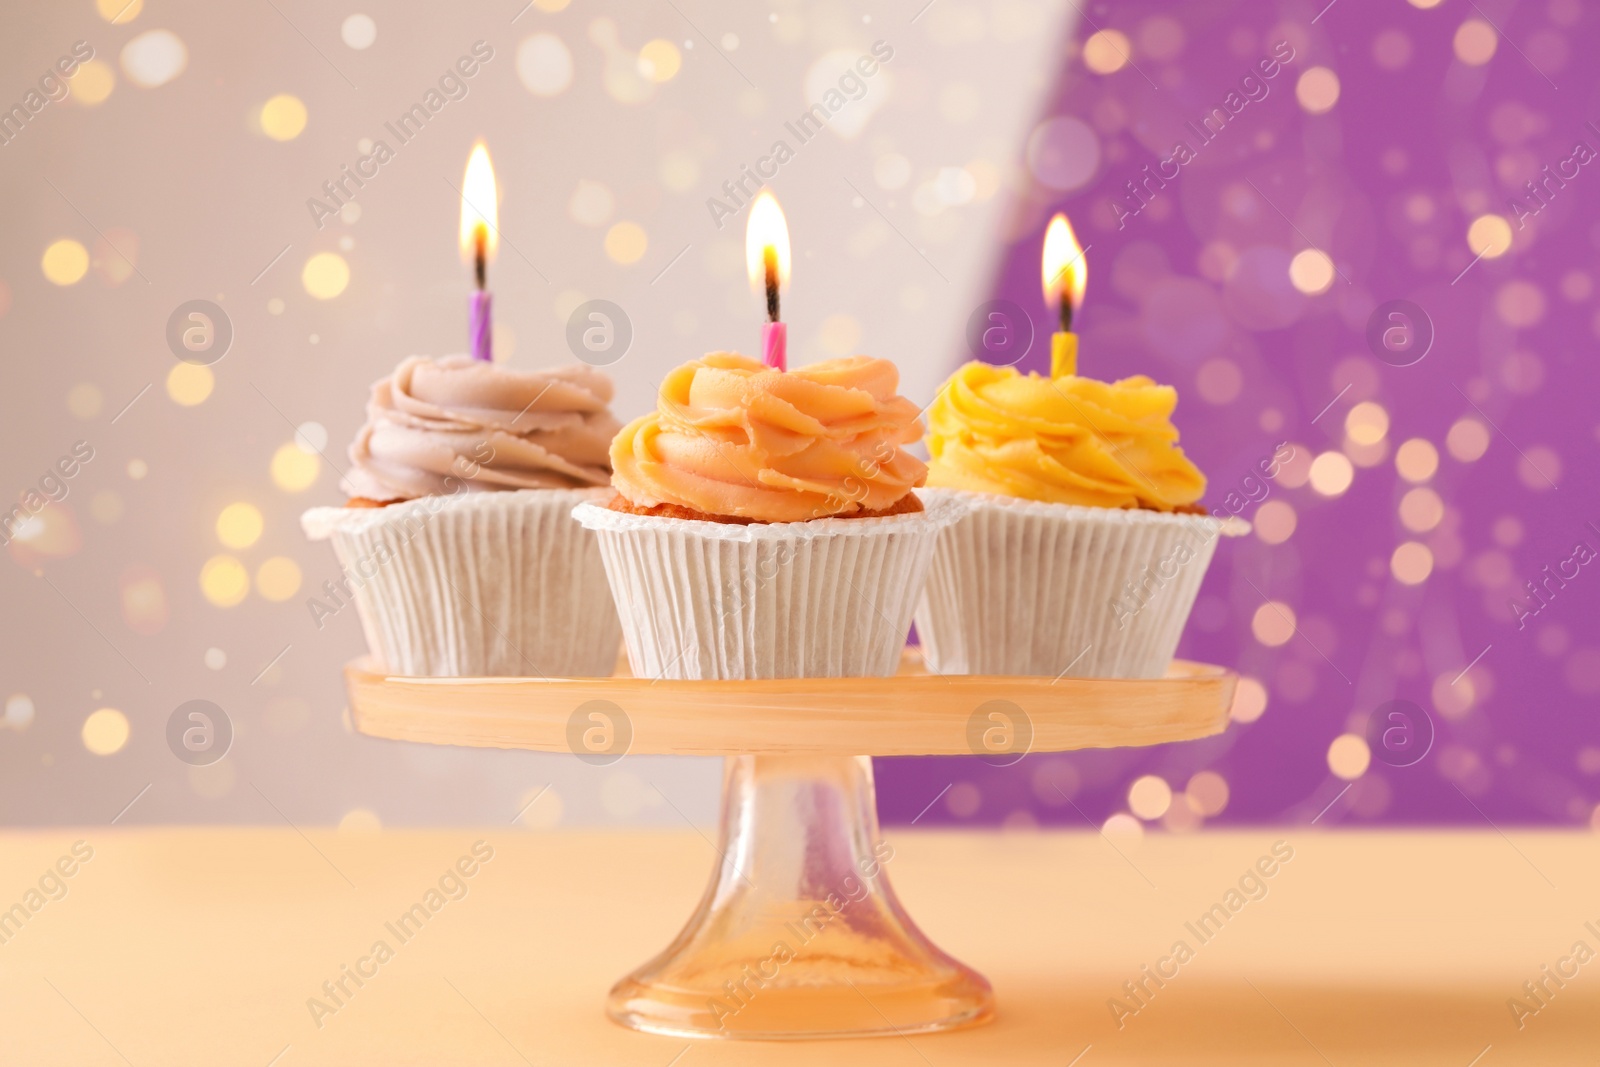 Photo of Stand with birthday cupcakes on table against blurred lights